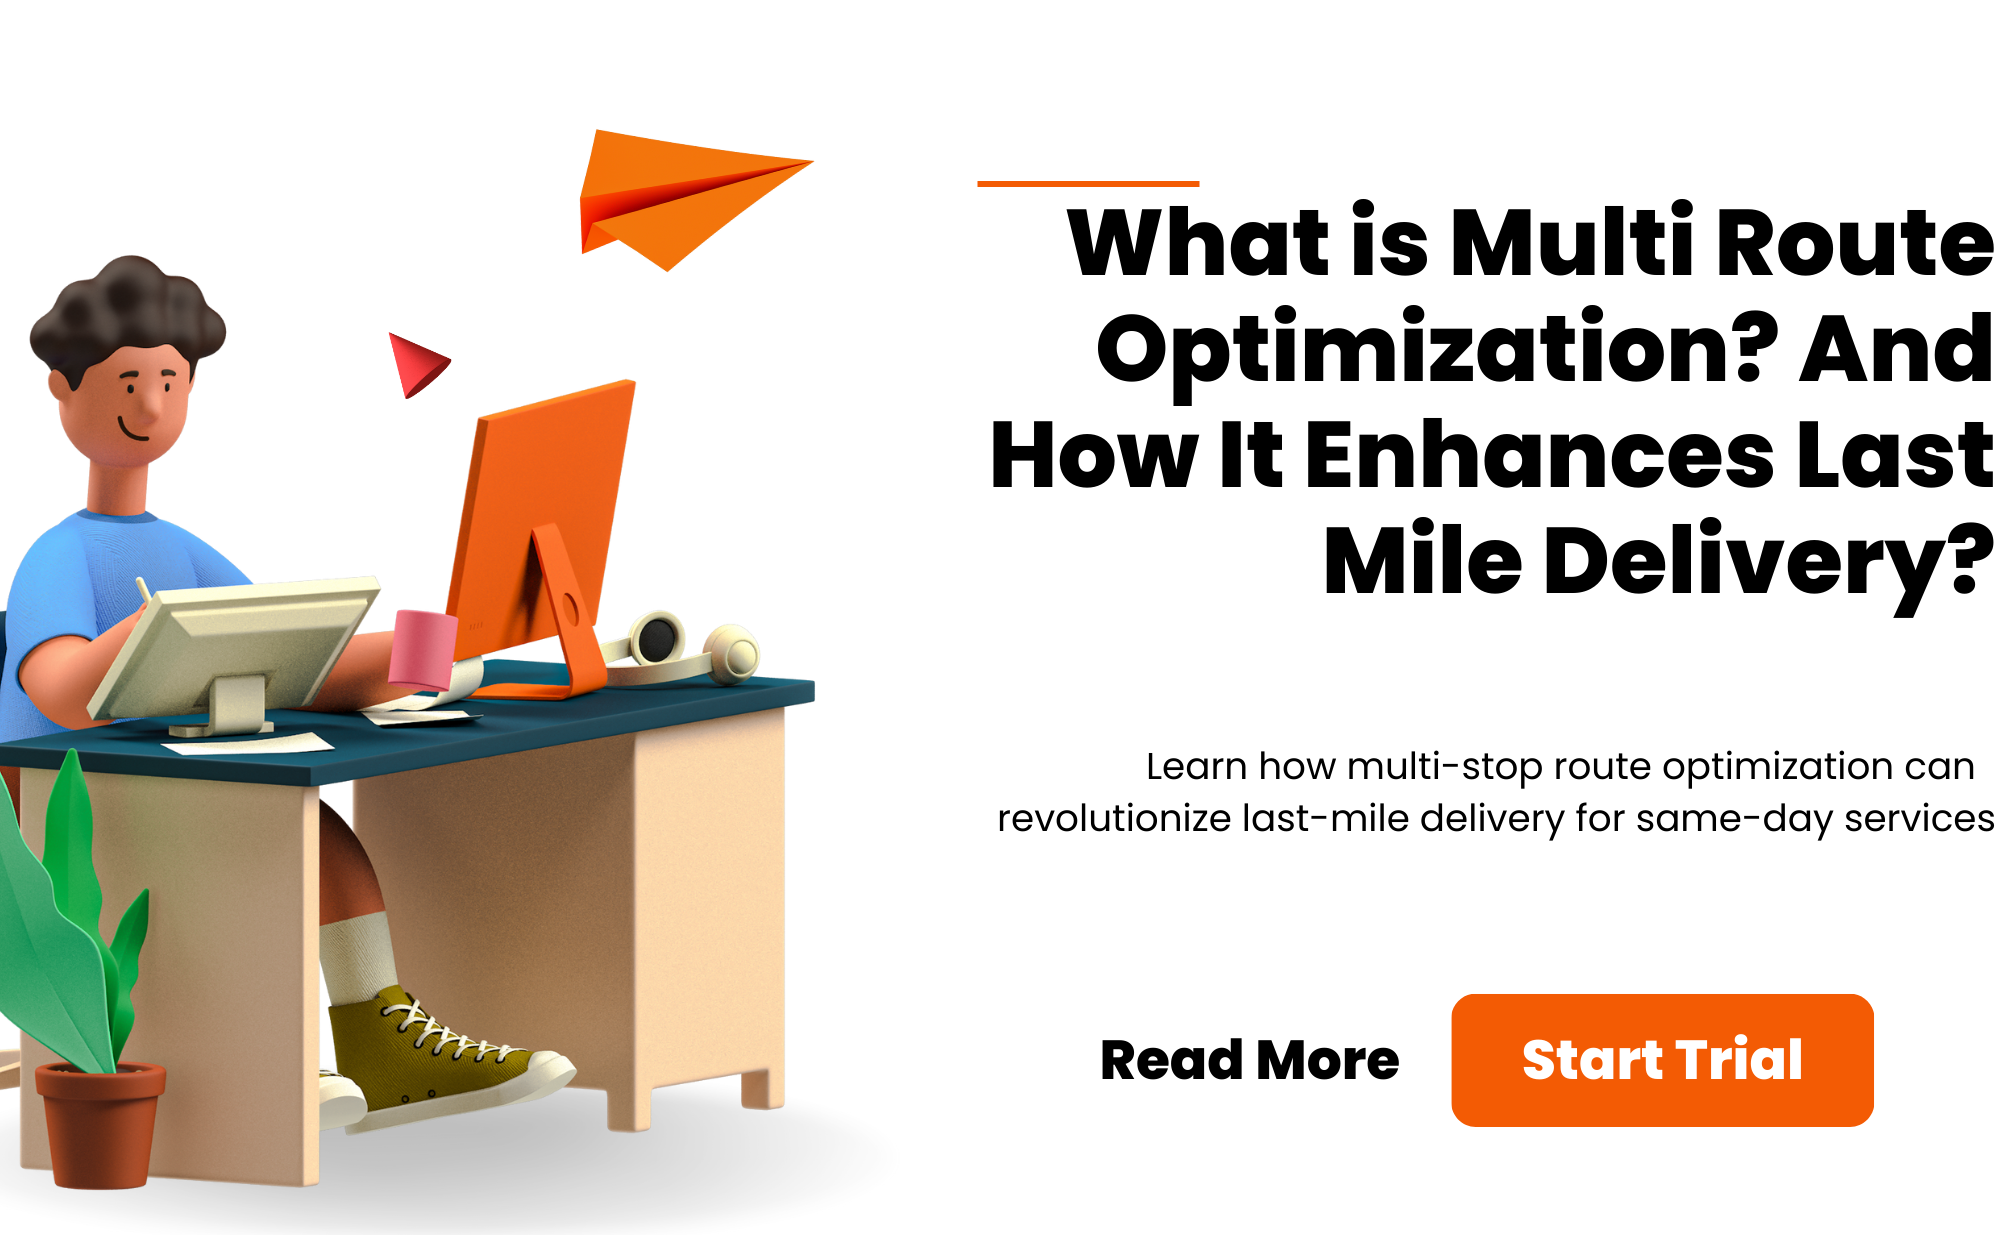 What is Multi Route Optimization? And How It Enhances Last Mile Delivery?